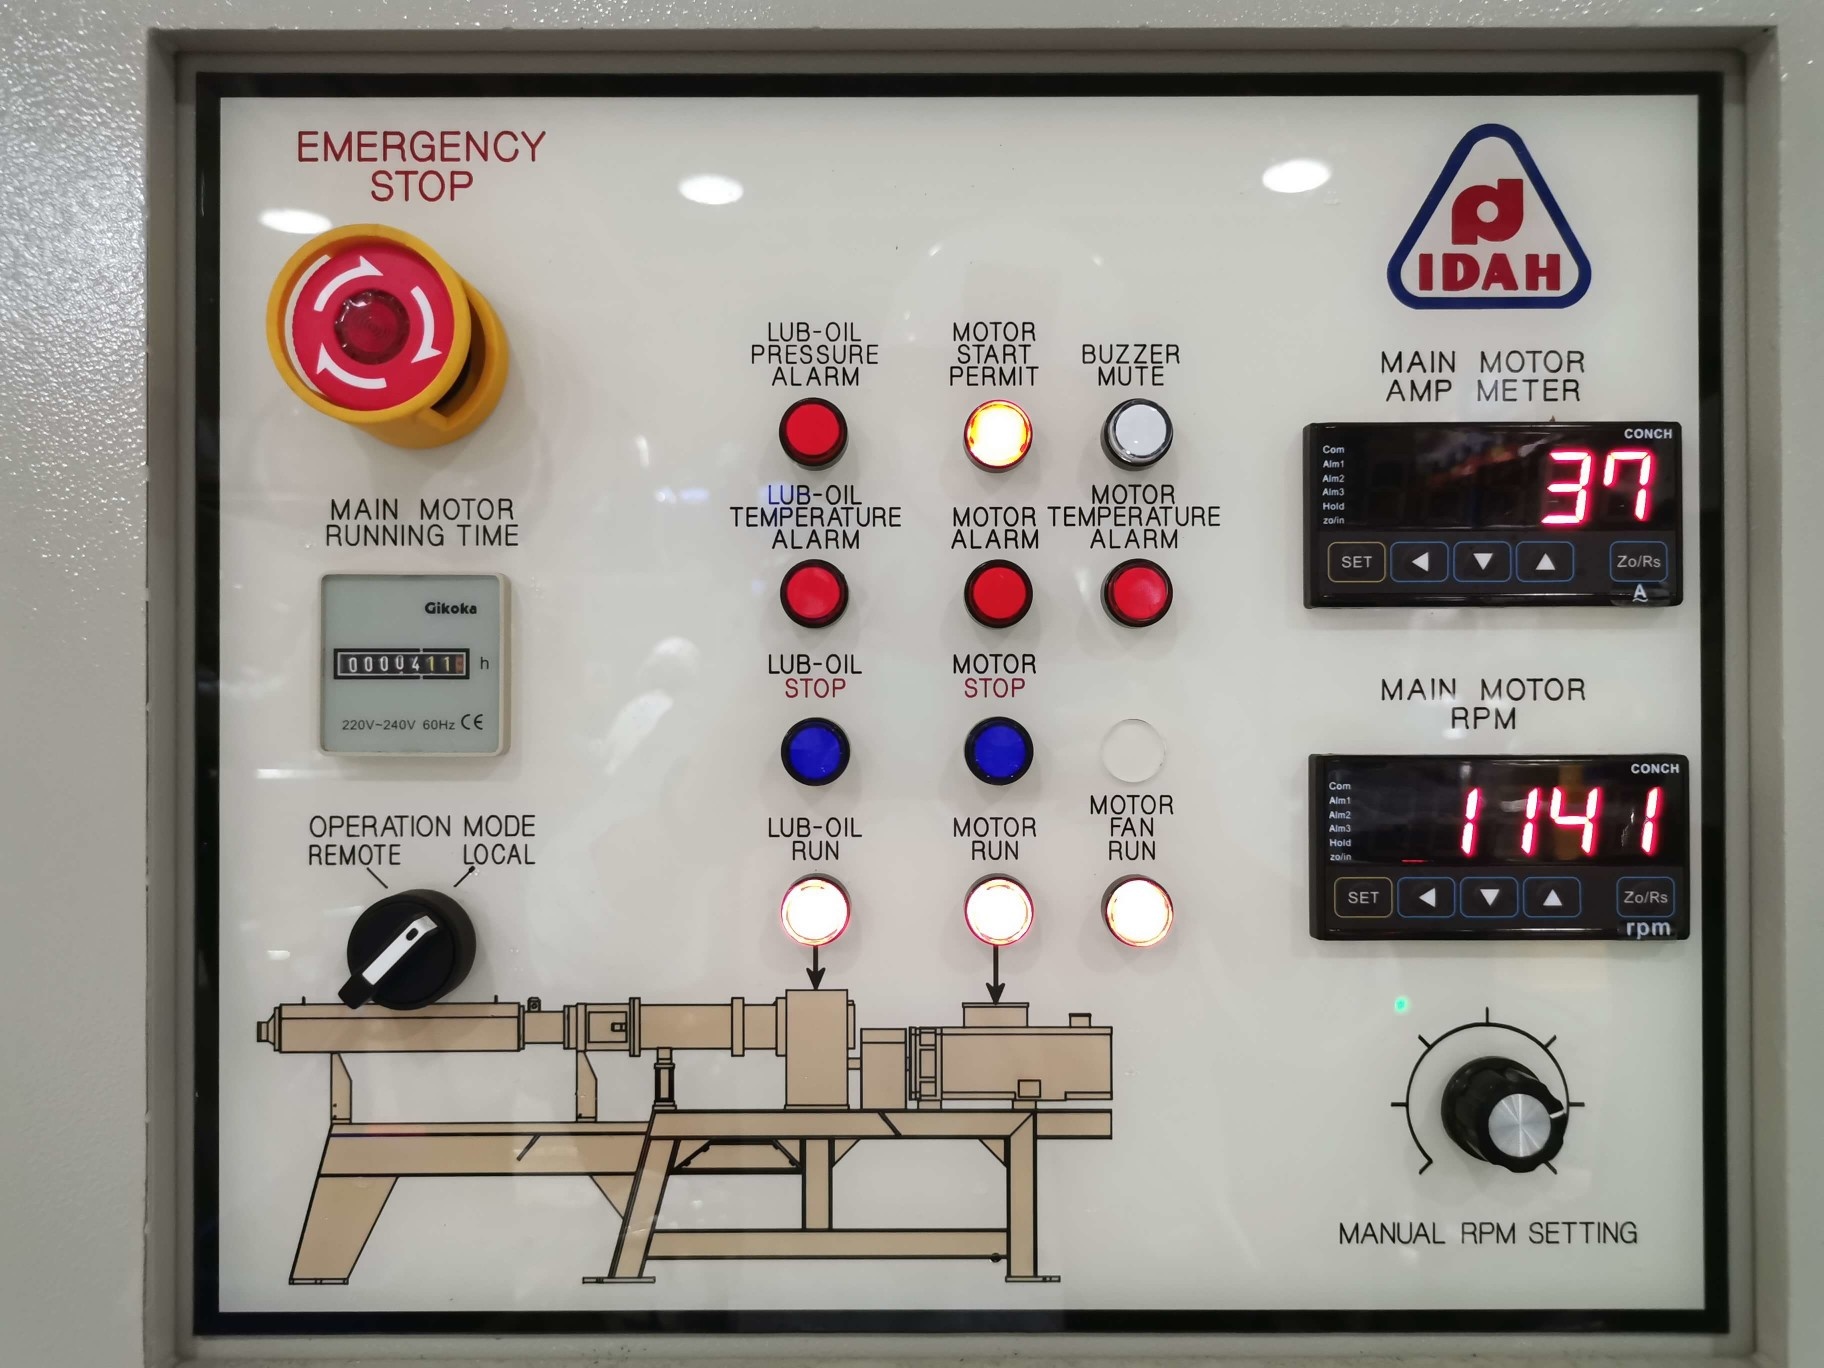 Push-button control panel for easy operation